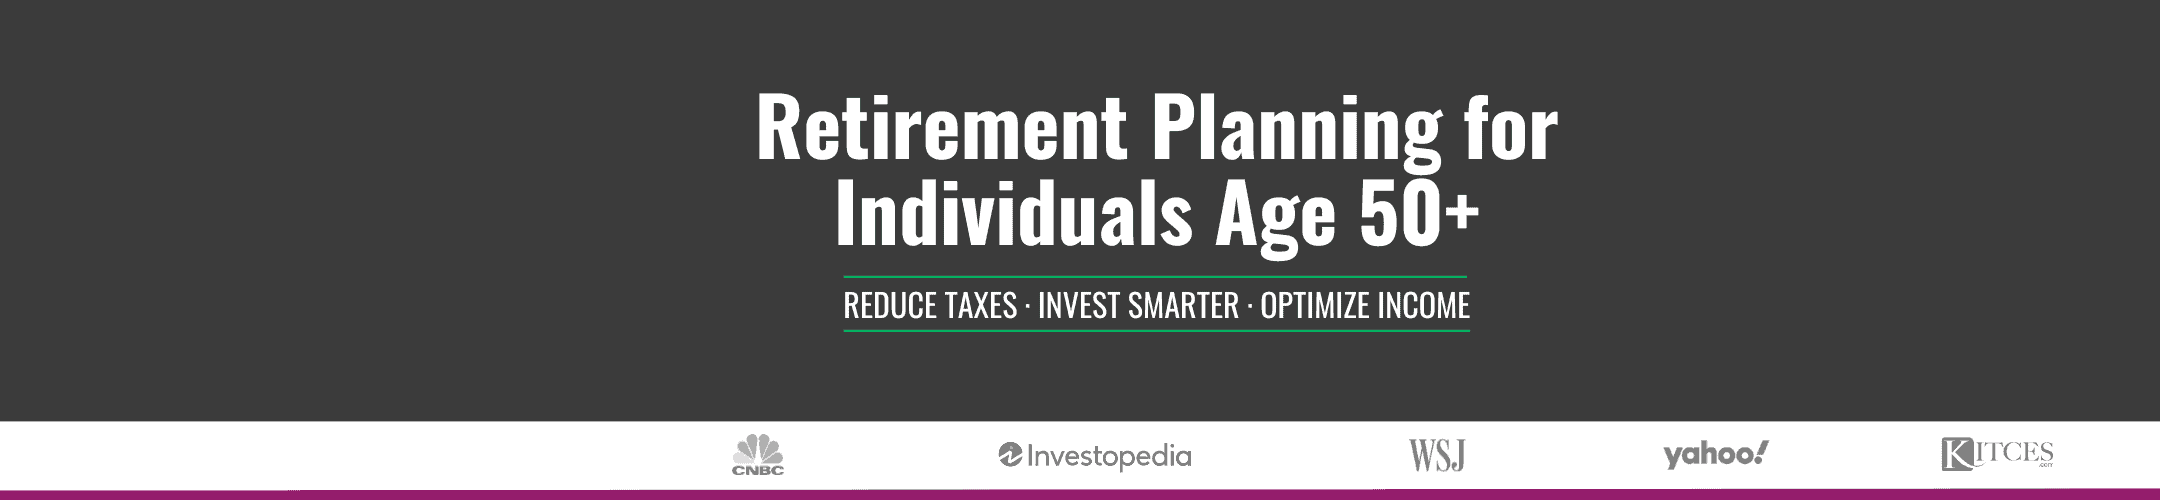 Exploring strategies for retirement: smart investments for over-50s to reduce taxes and optimize income.